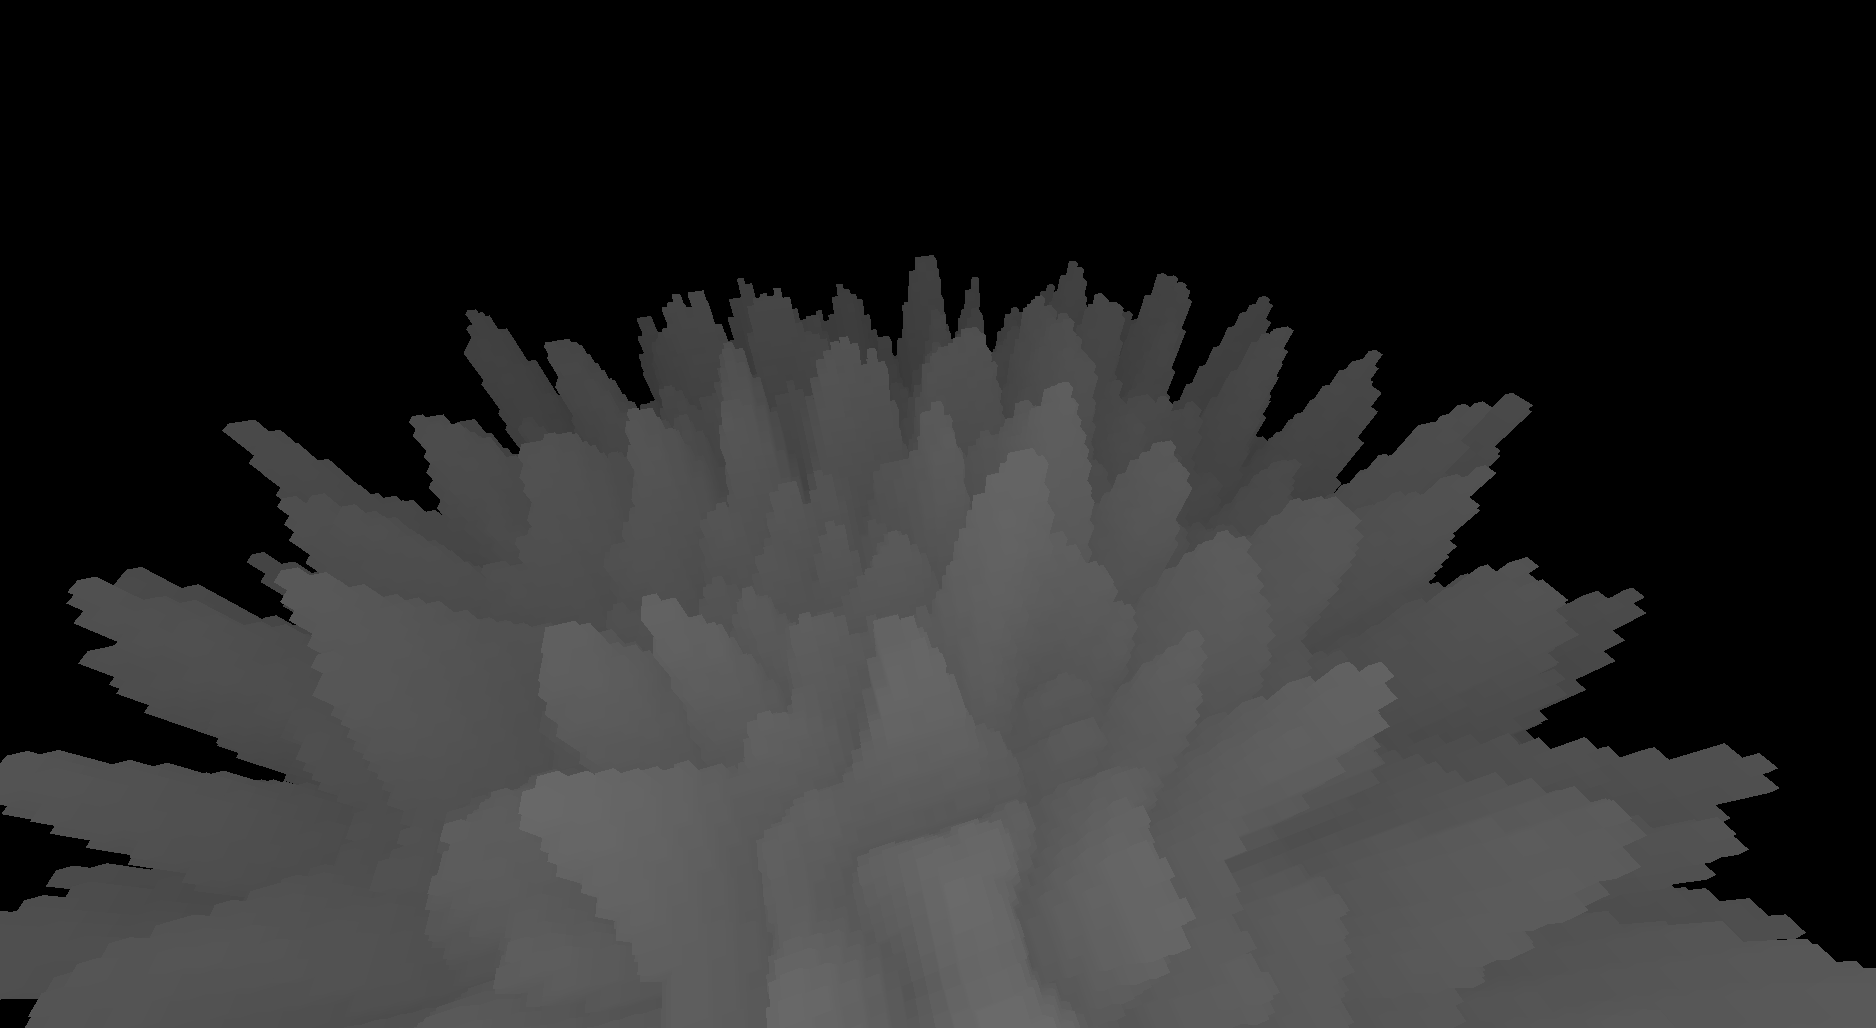 A bunch of spikes rendered from very small light-gray cubes